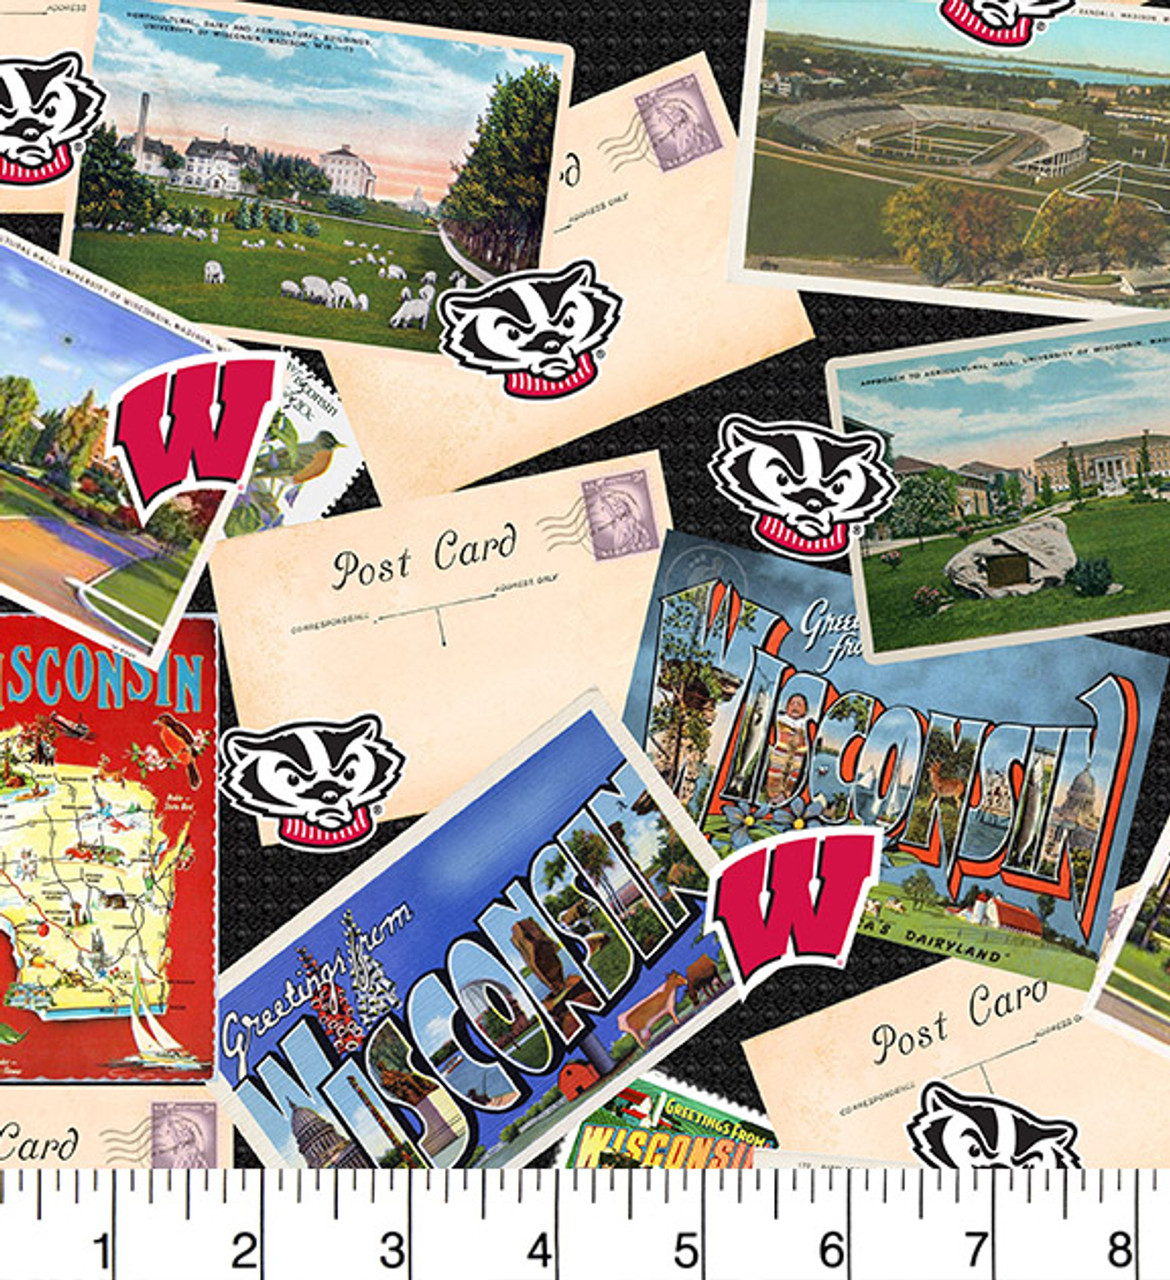 University of Wisconsin Badgers Cotton Fabric with Postcard Print or Matching Solid Cotton Fabrics